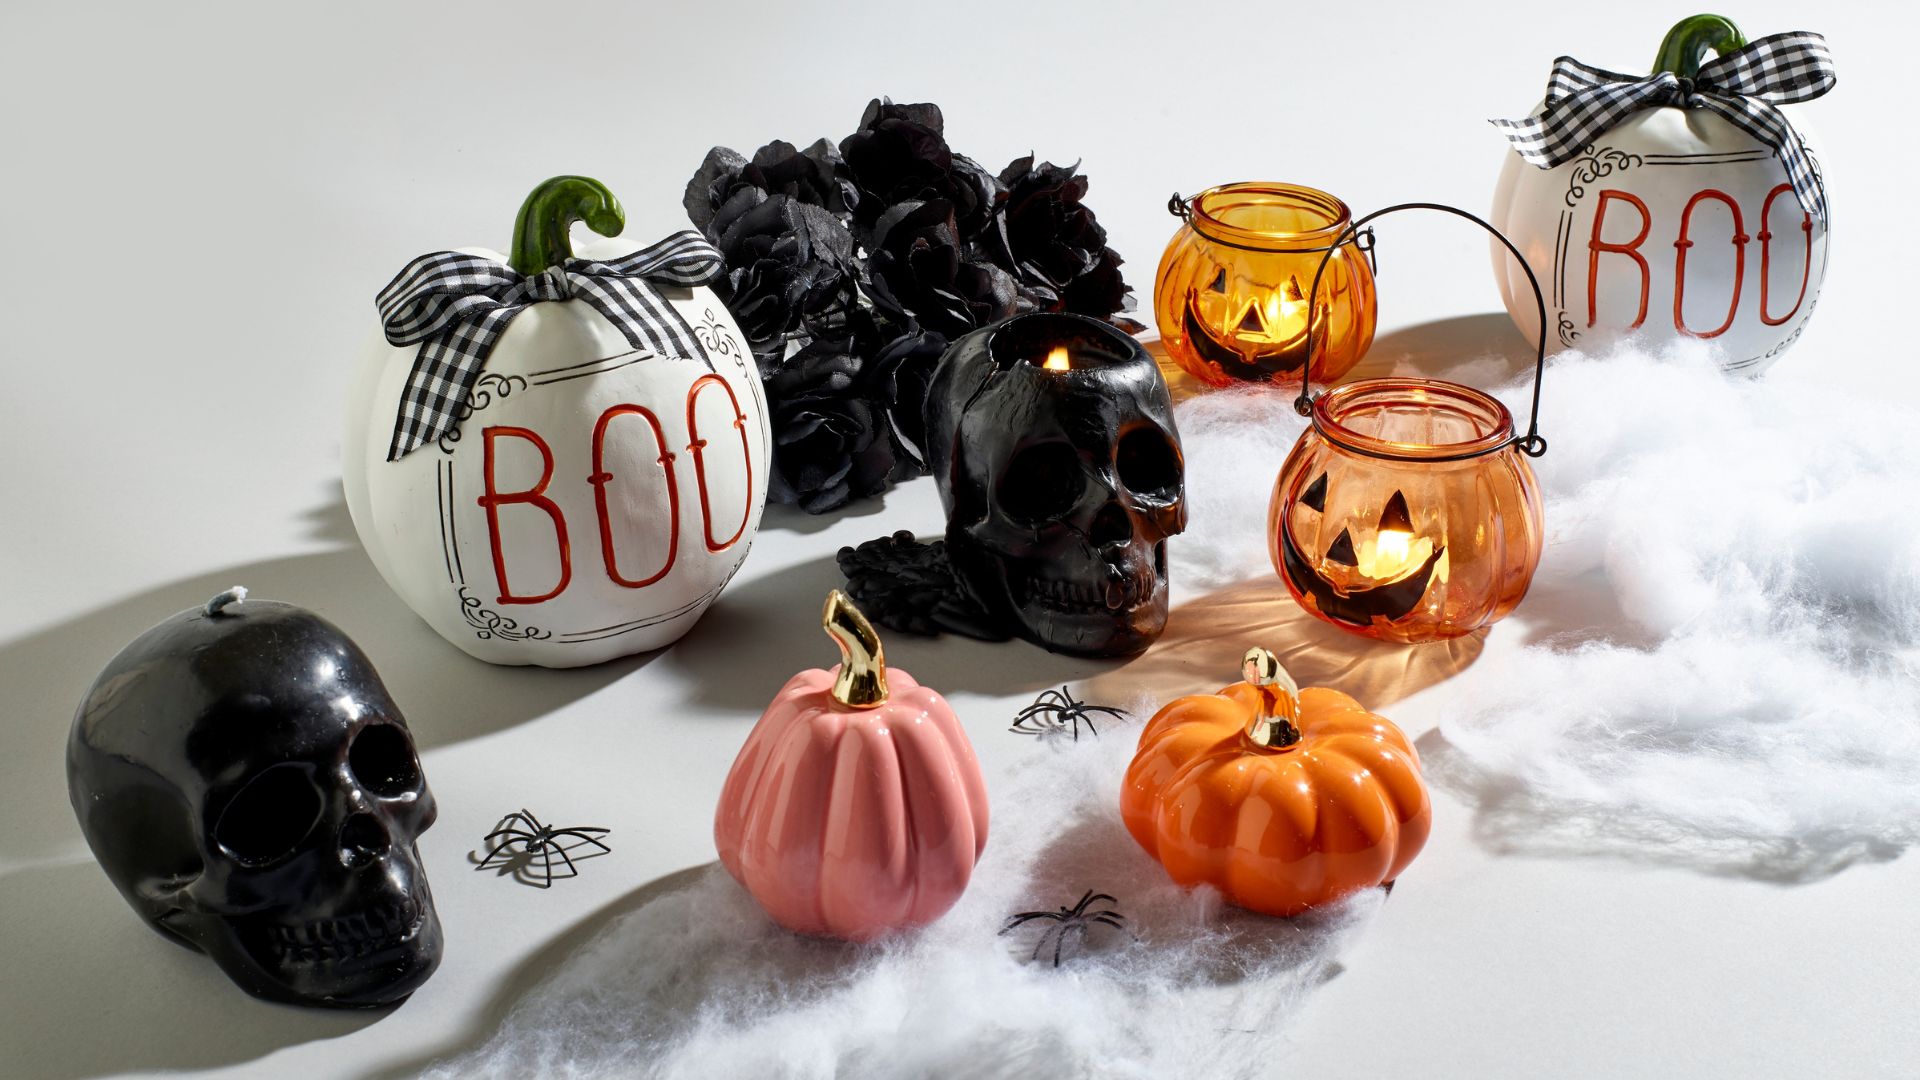 Get Into The Spooky Spirit With These 5 Halloween Pumpkin Ideas